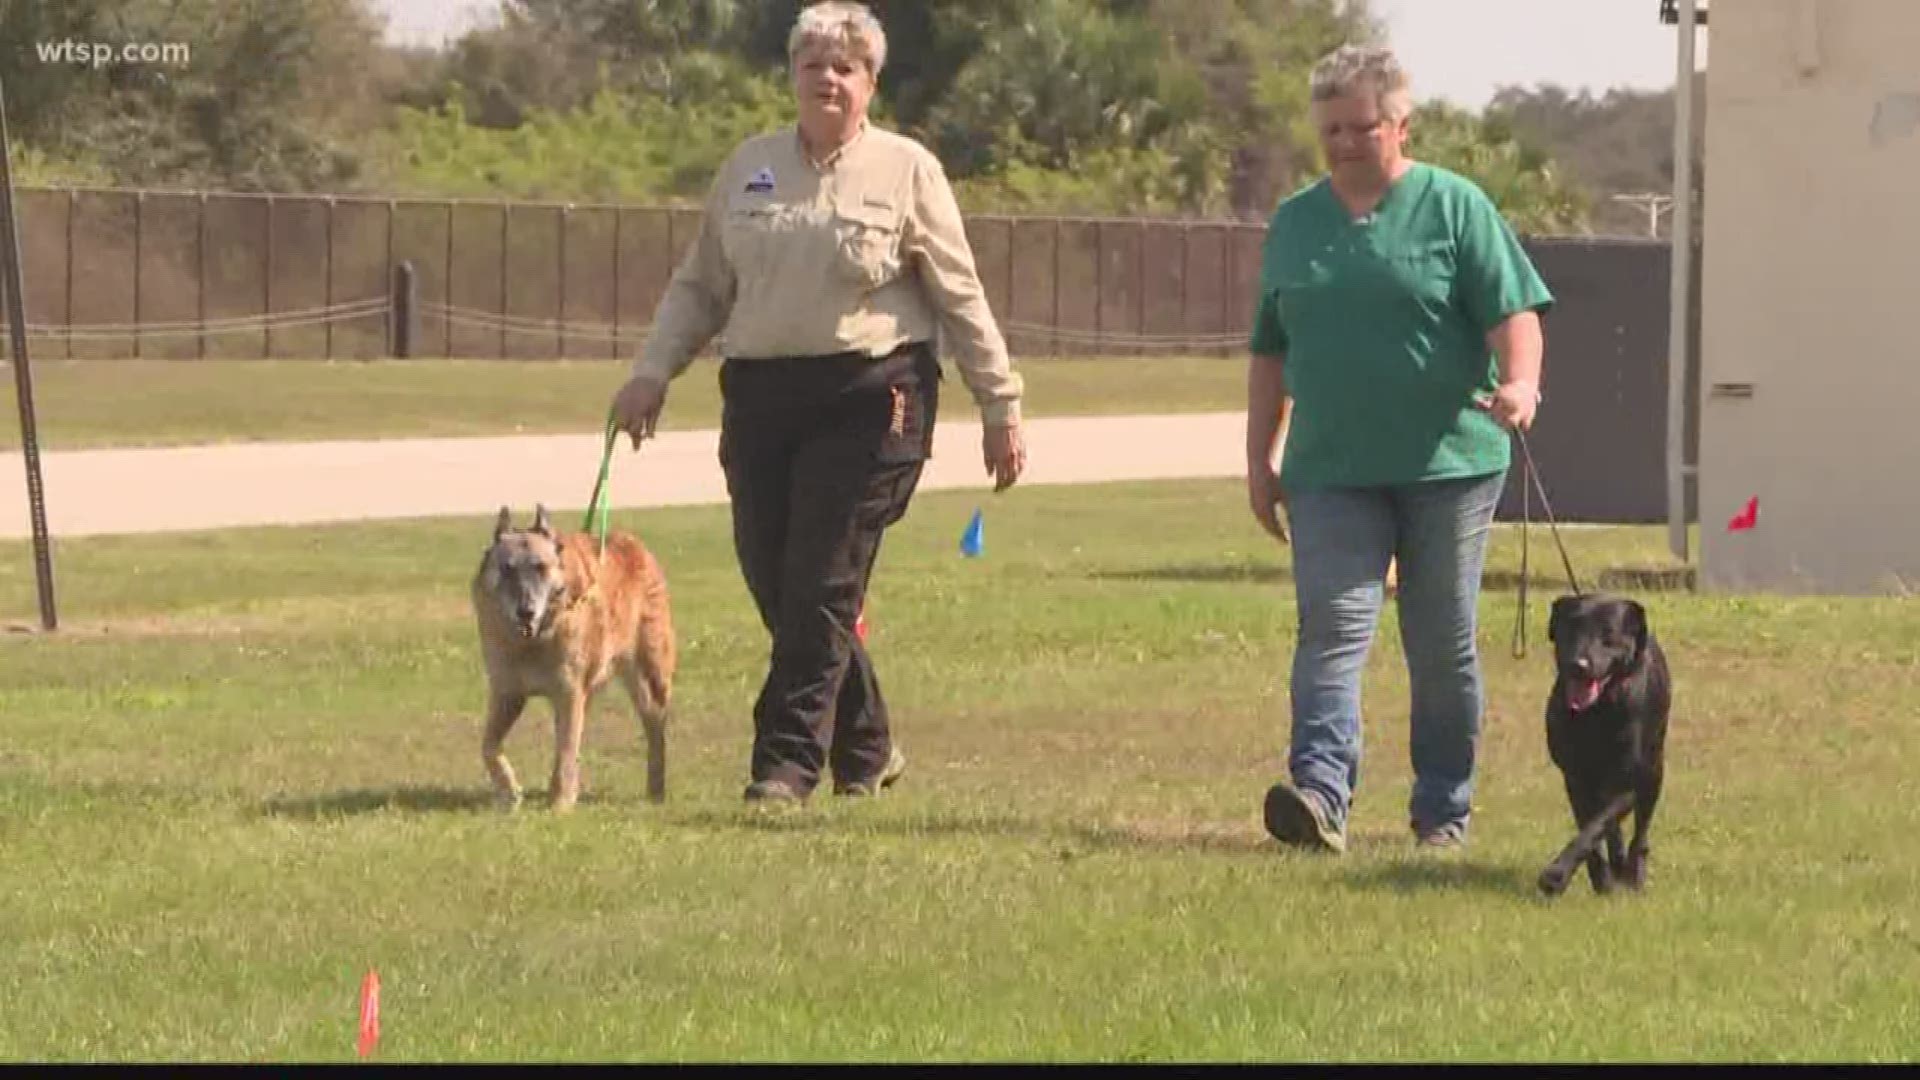 A cadaver dog search will begin Tuesday afternoon to detect possible remains from the burial ground.